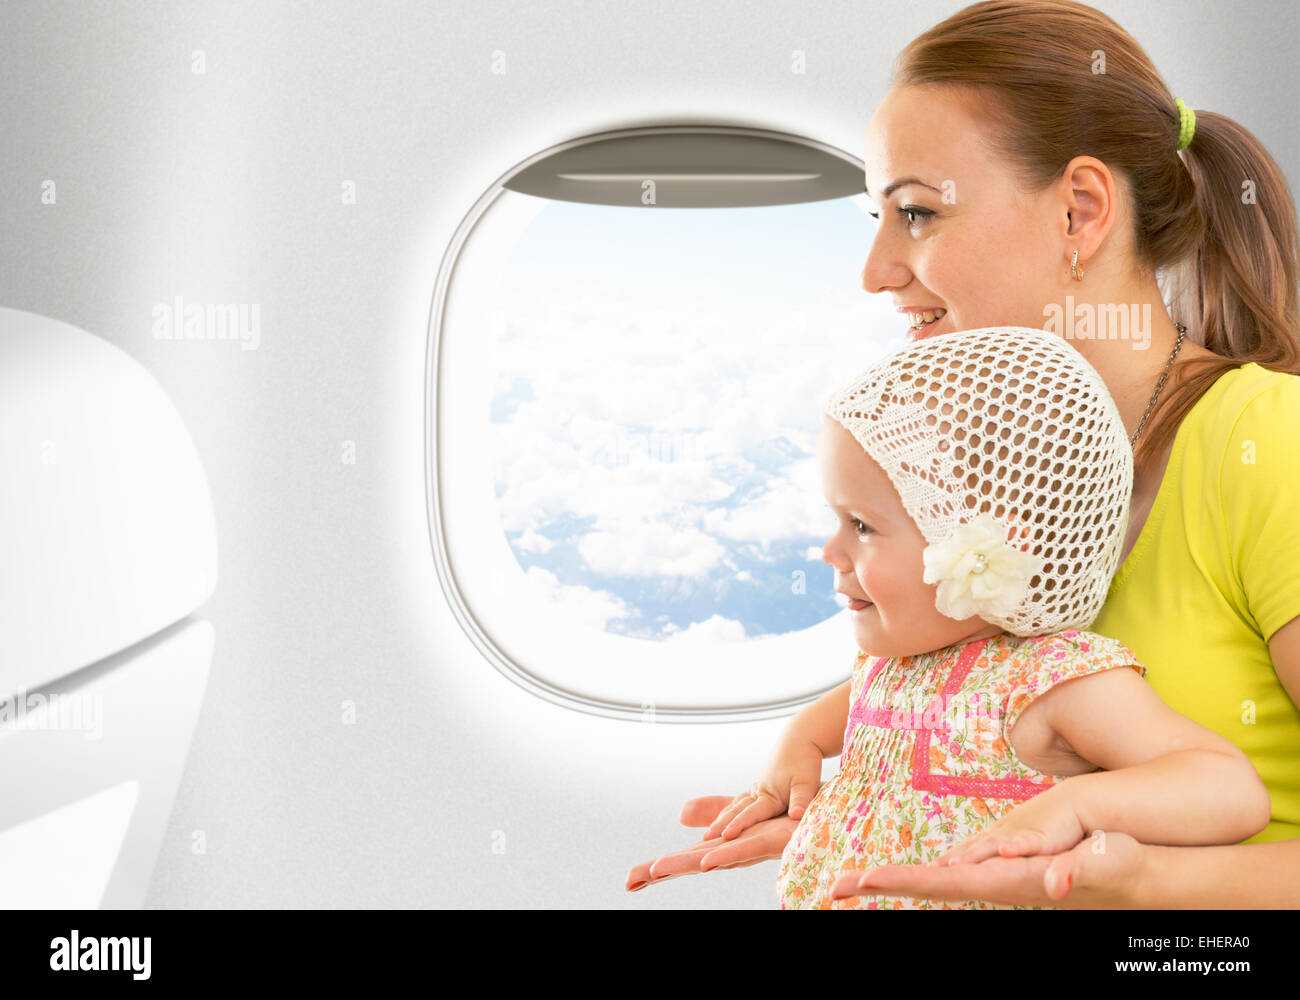 Airplane flight from inside. Woman and kid travelling together. Stock Photo